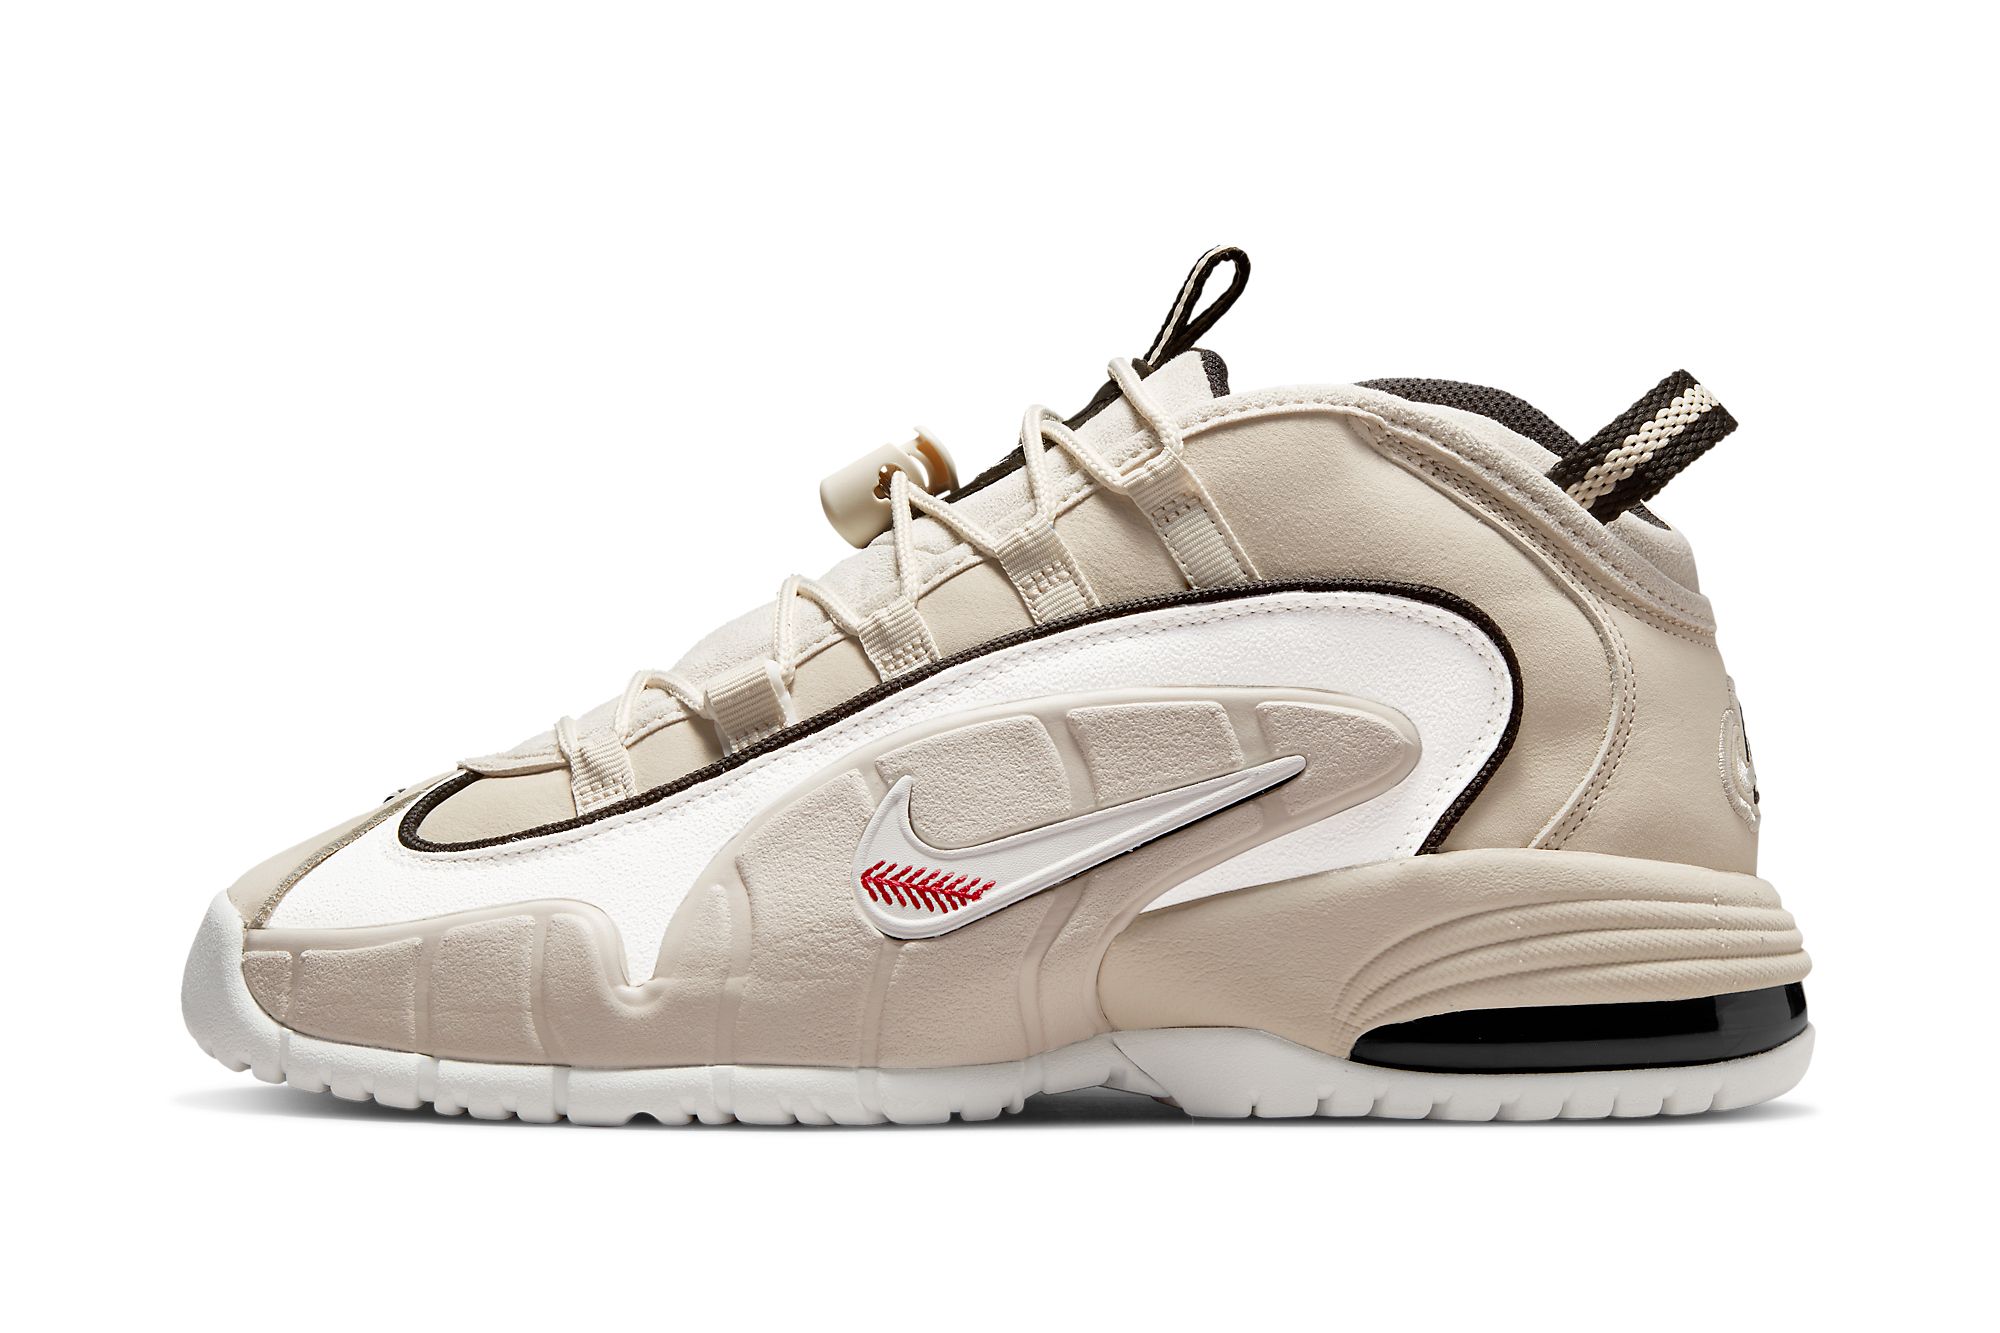 Up Close with the Social Status x Nike Air Max Penny 1 'Recess 